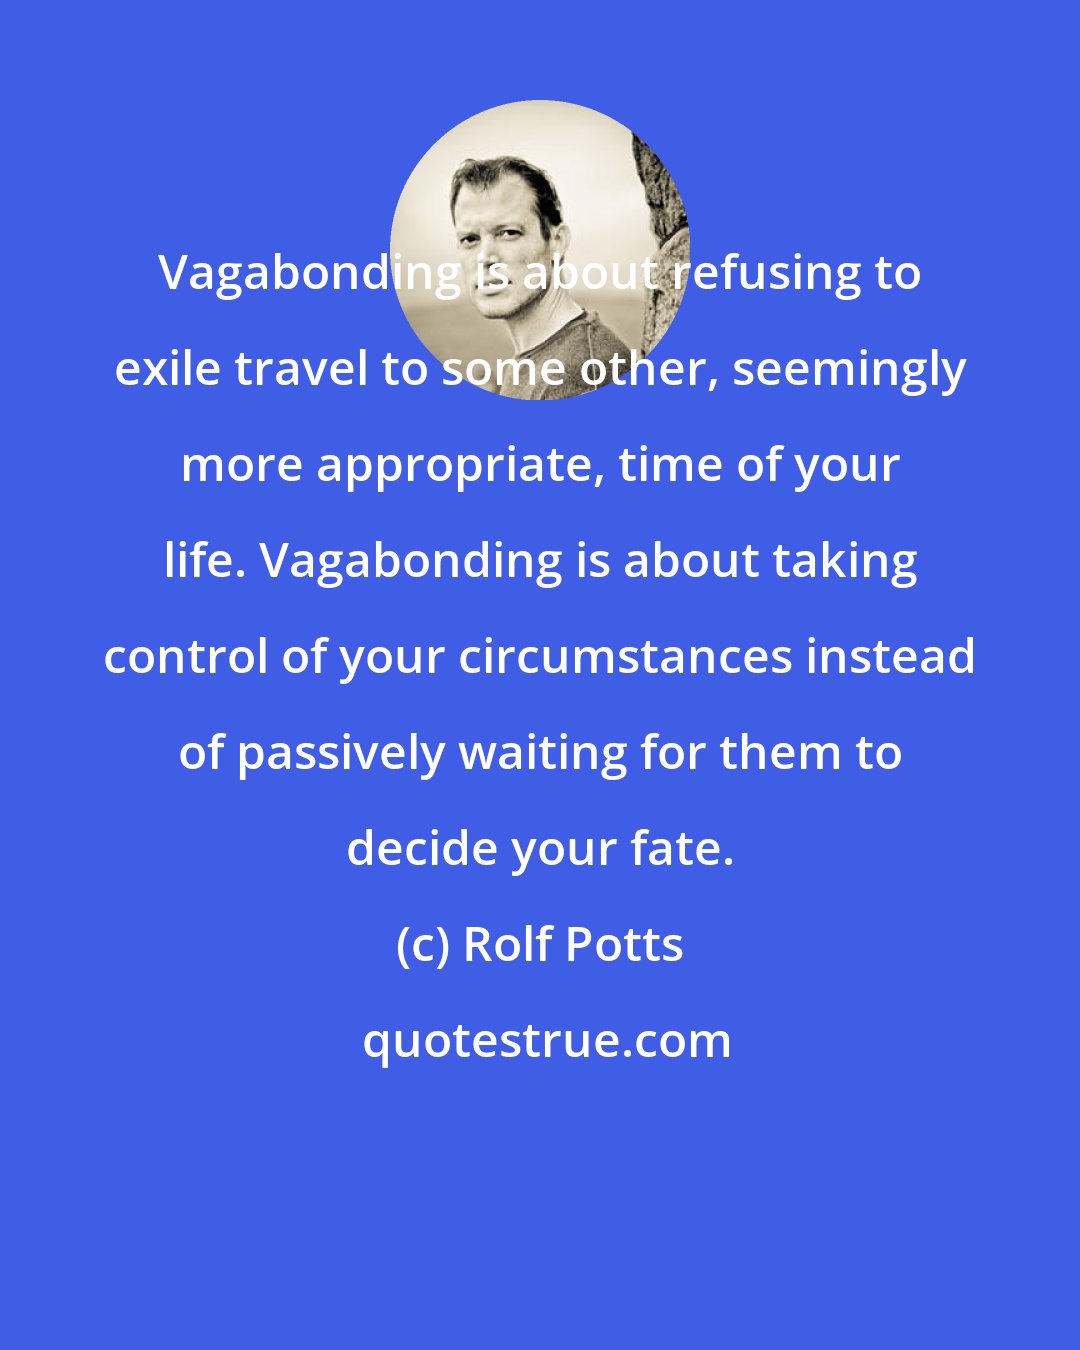 Rolf Potts: Vagabonding is about refusing to exile travel to some other, seemingly more appropriate, time of your life. Vagabonding is about taking control of your circumstances instead of passively waiting for them to decide your fate.